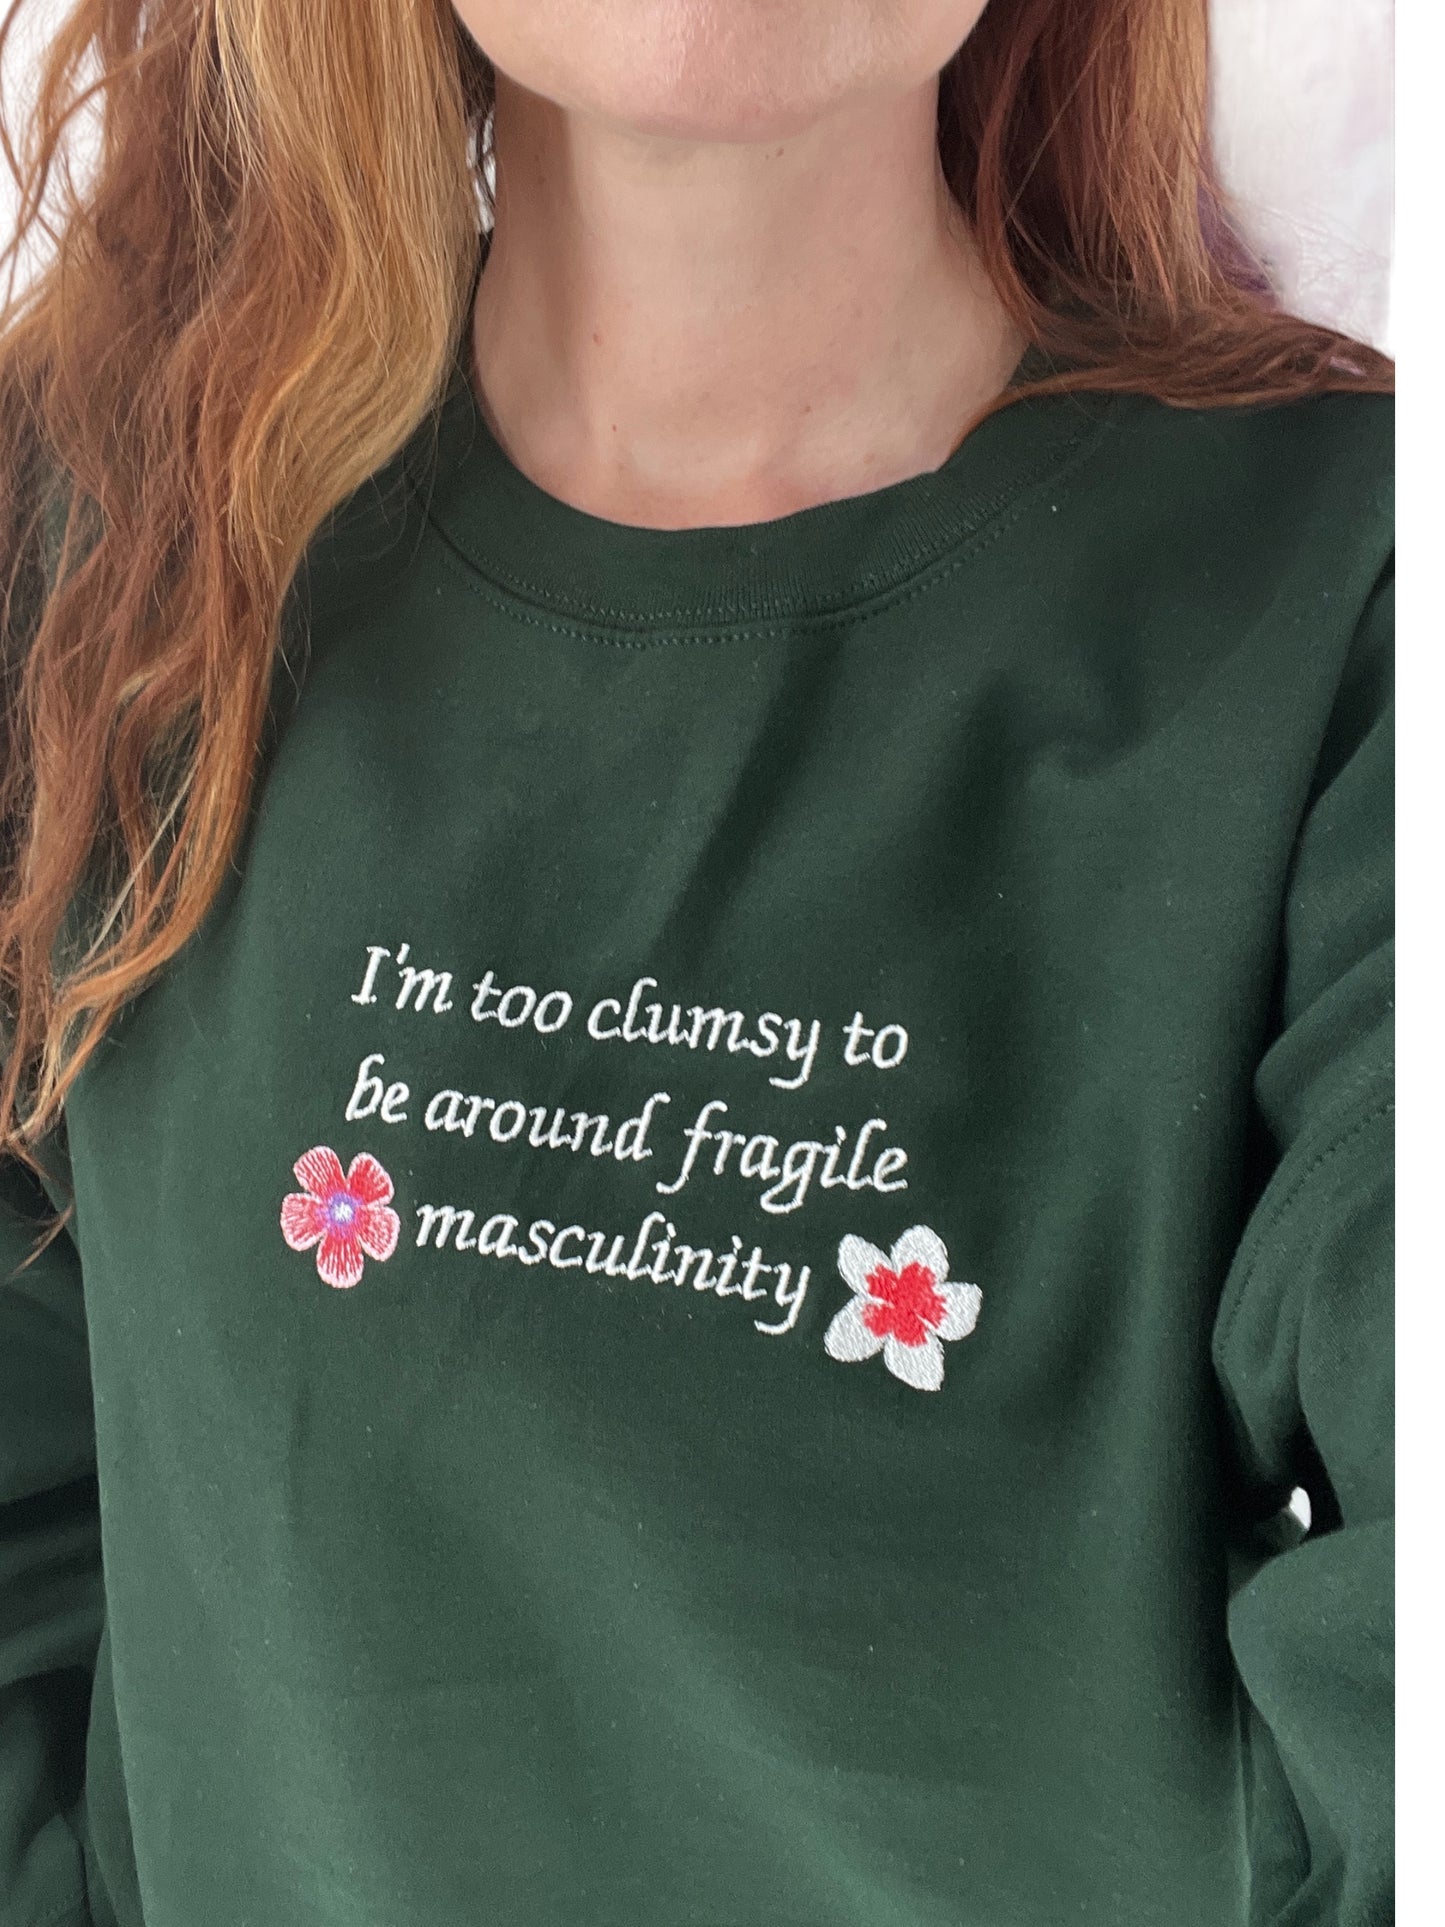 I'm Too Clumsy To Be Around Fragile Masculinity Embroidered Unisex T-Shirt or Sweatshirt